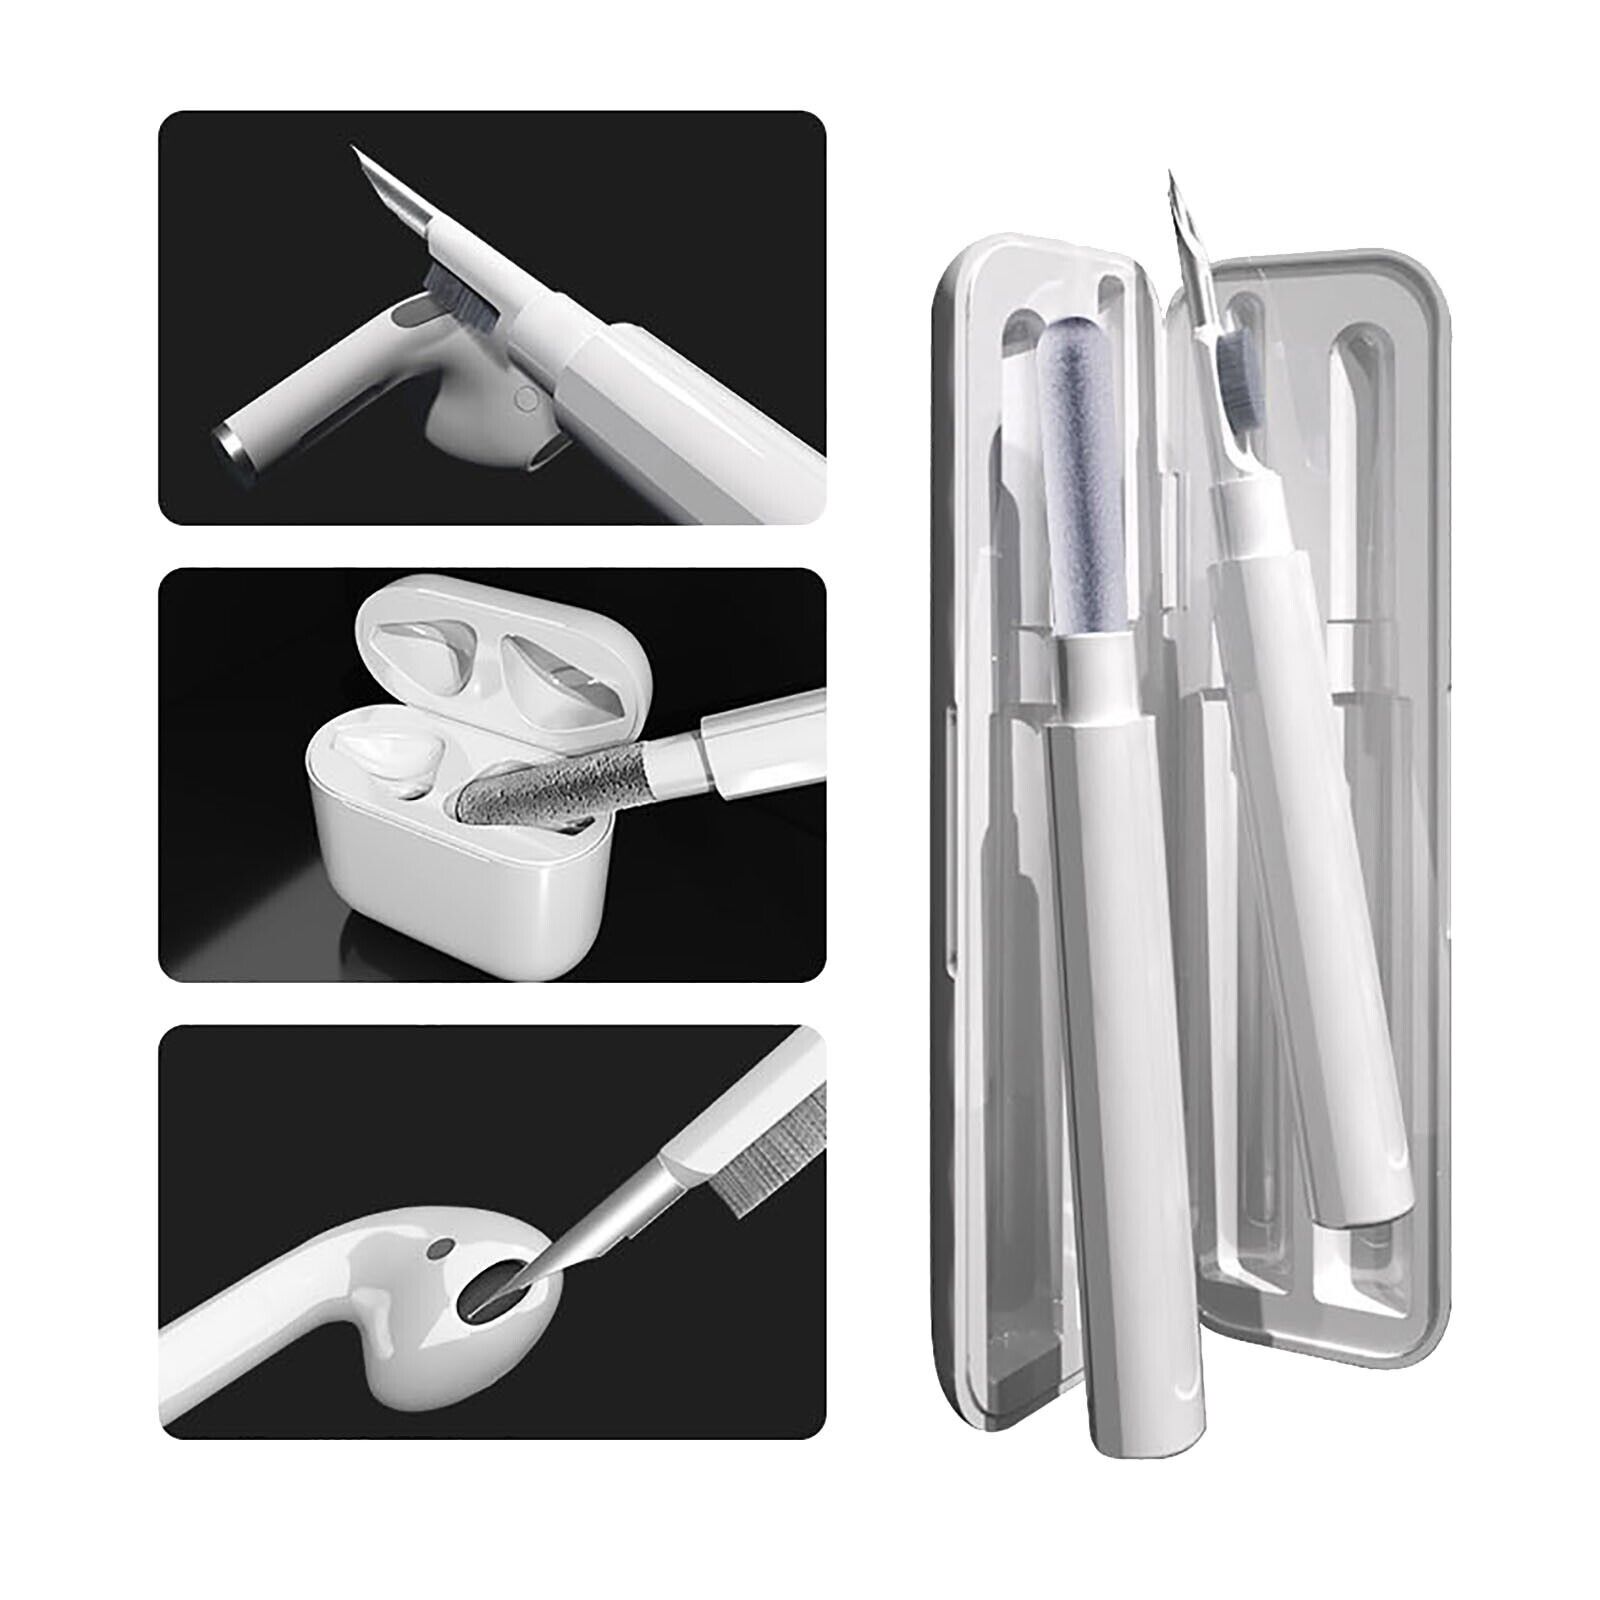 Bluetooth Headphone Cleaning Pen, Multifunctional Split Air Pods Cleaner